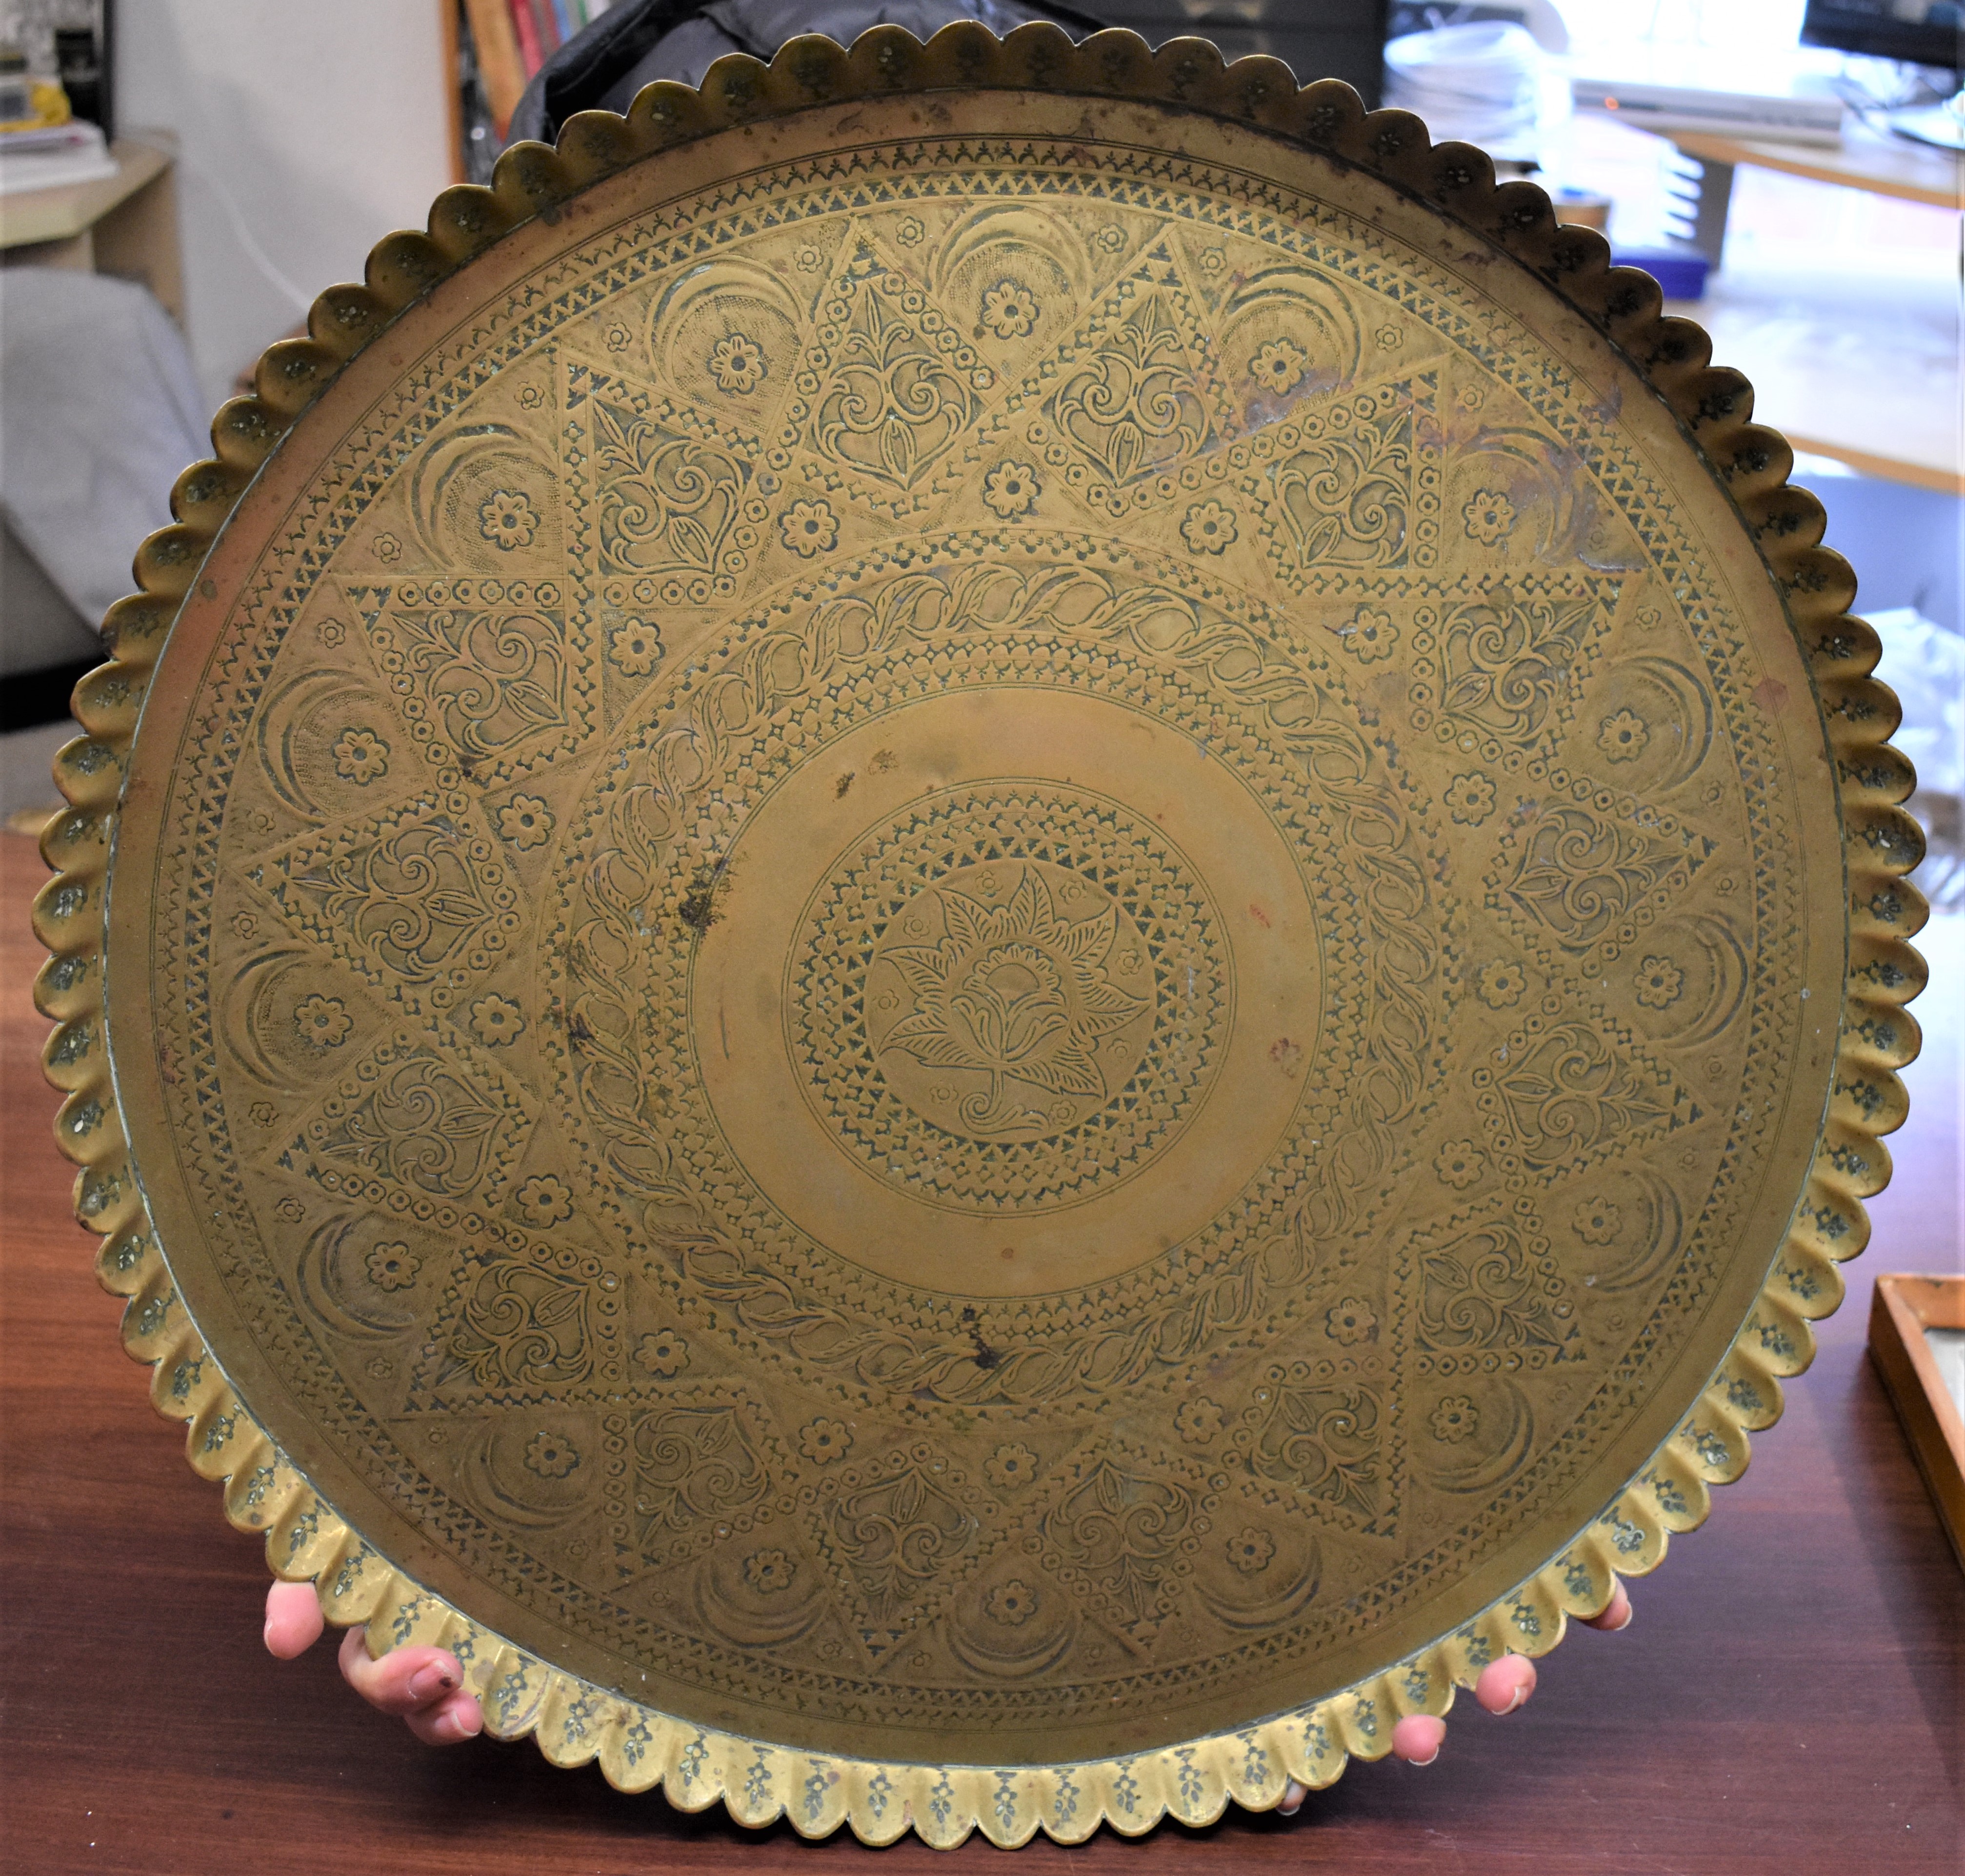 Vintage Middle Eastern Etched Round Copper Tray Table, a very ornate floral and Crescent etched